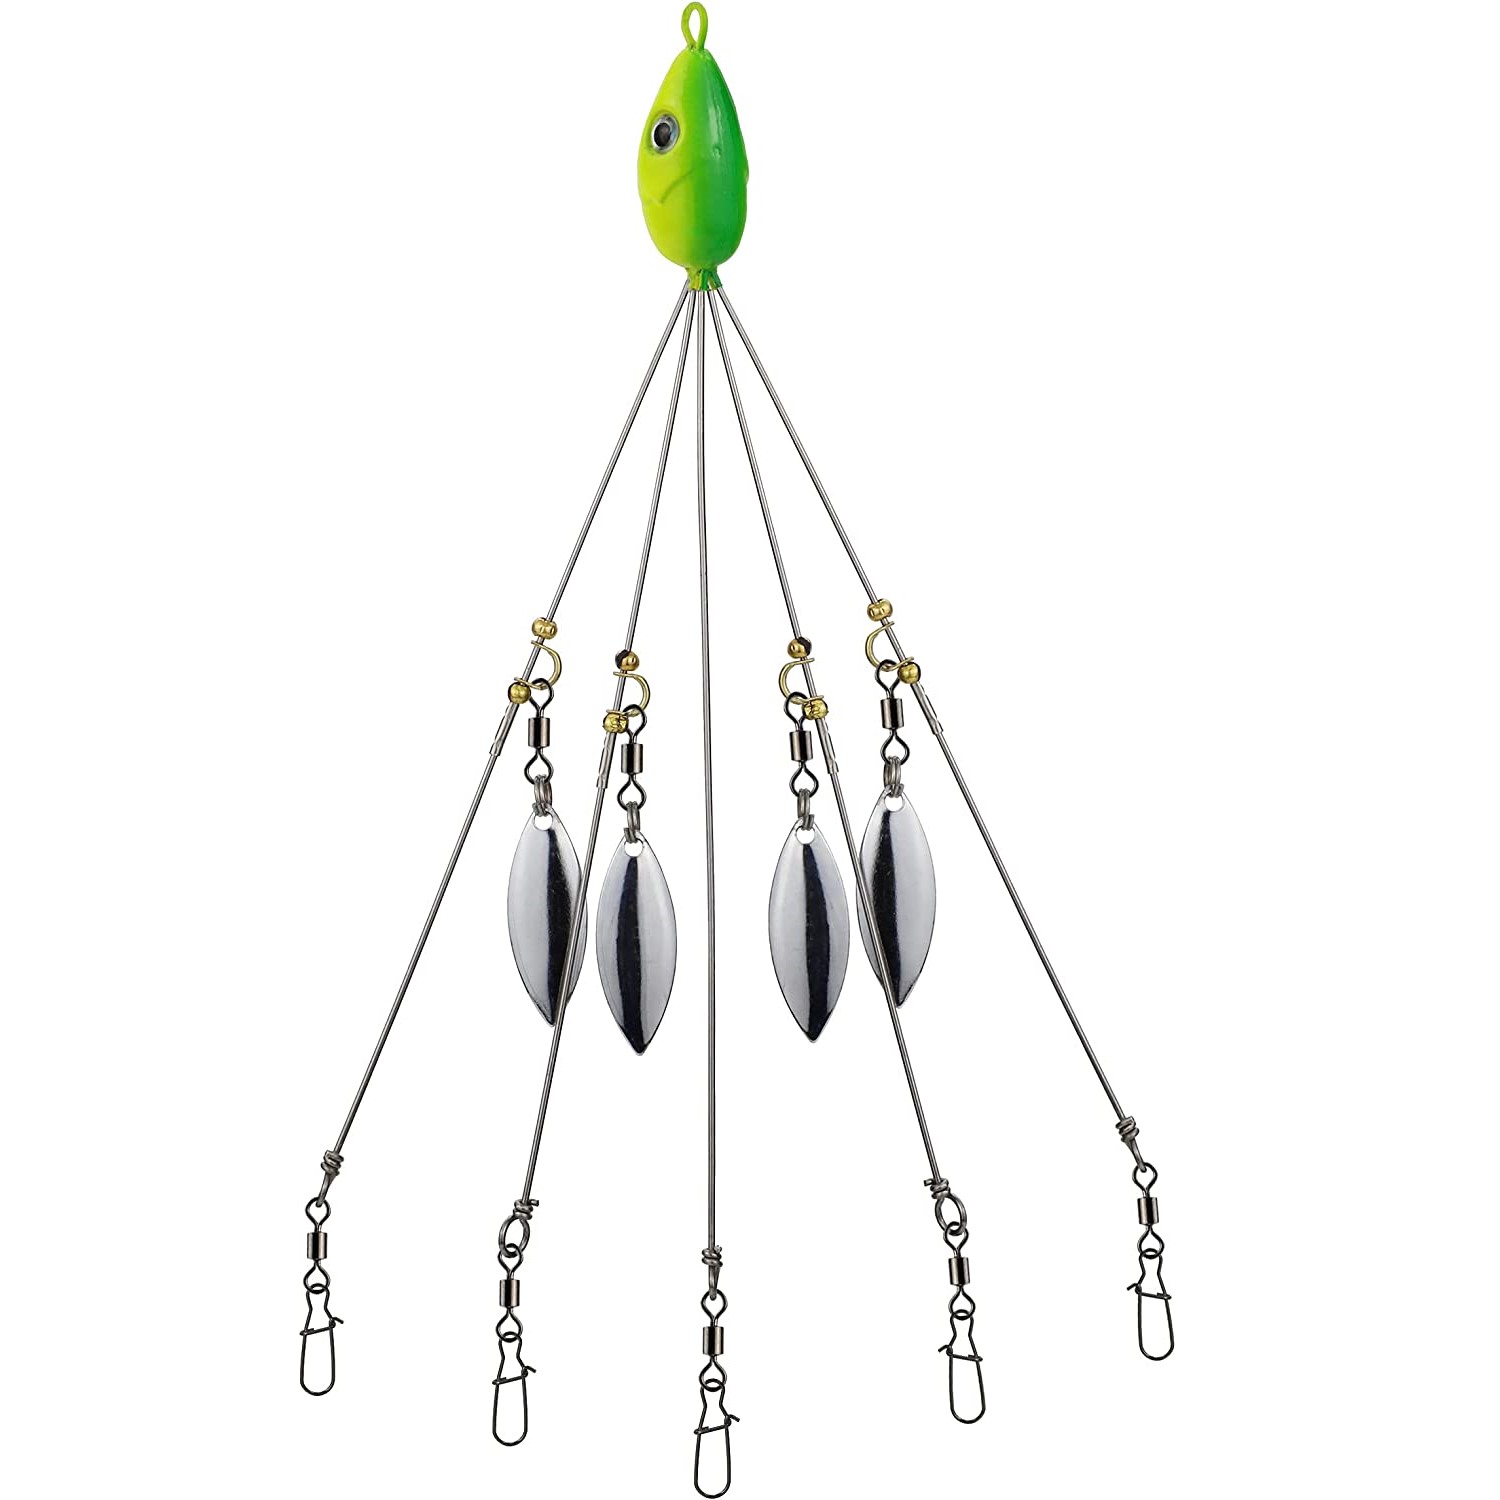 Ilure Alabama Rig Umbrella for Bass Fishing Kit with Willow Bladed Spin Jig Heads Freshwater Salwater Trout Stripers Lures 3 Arms